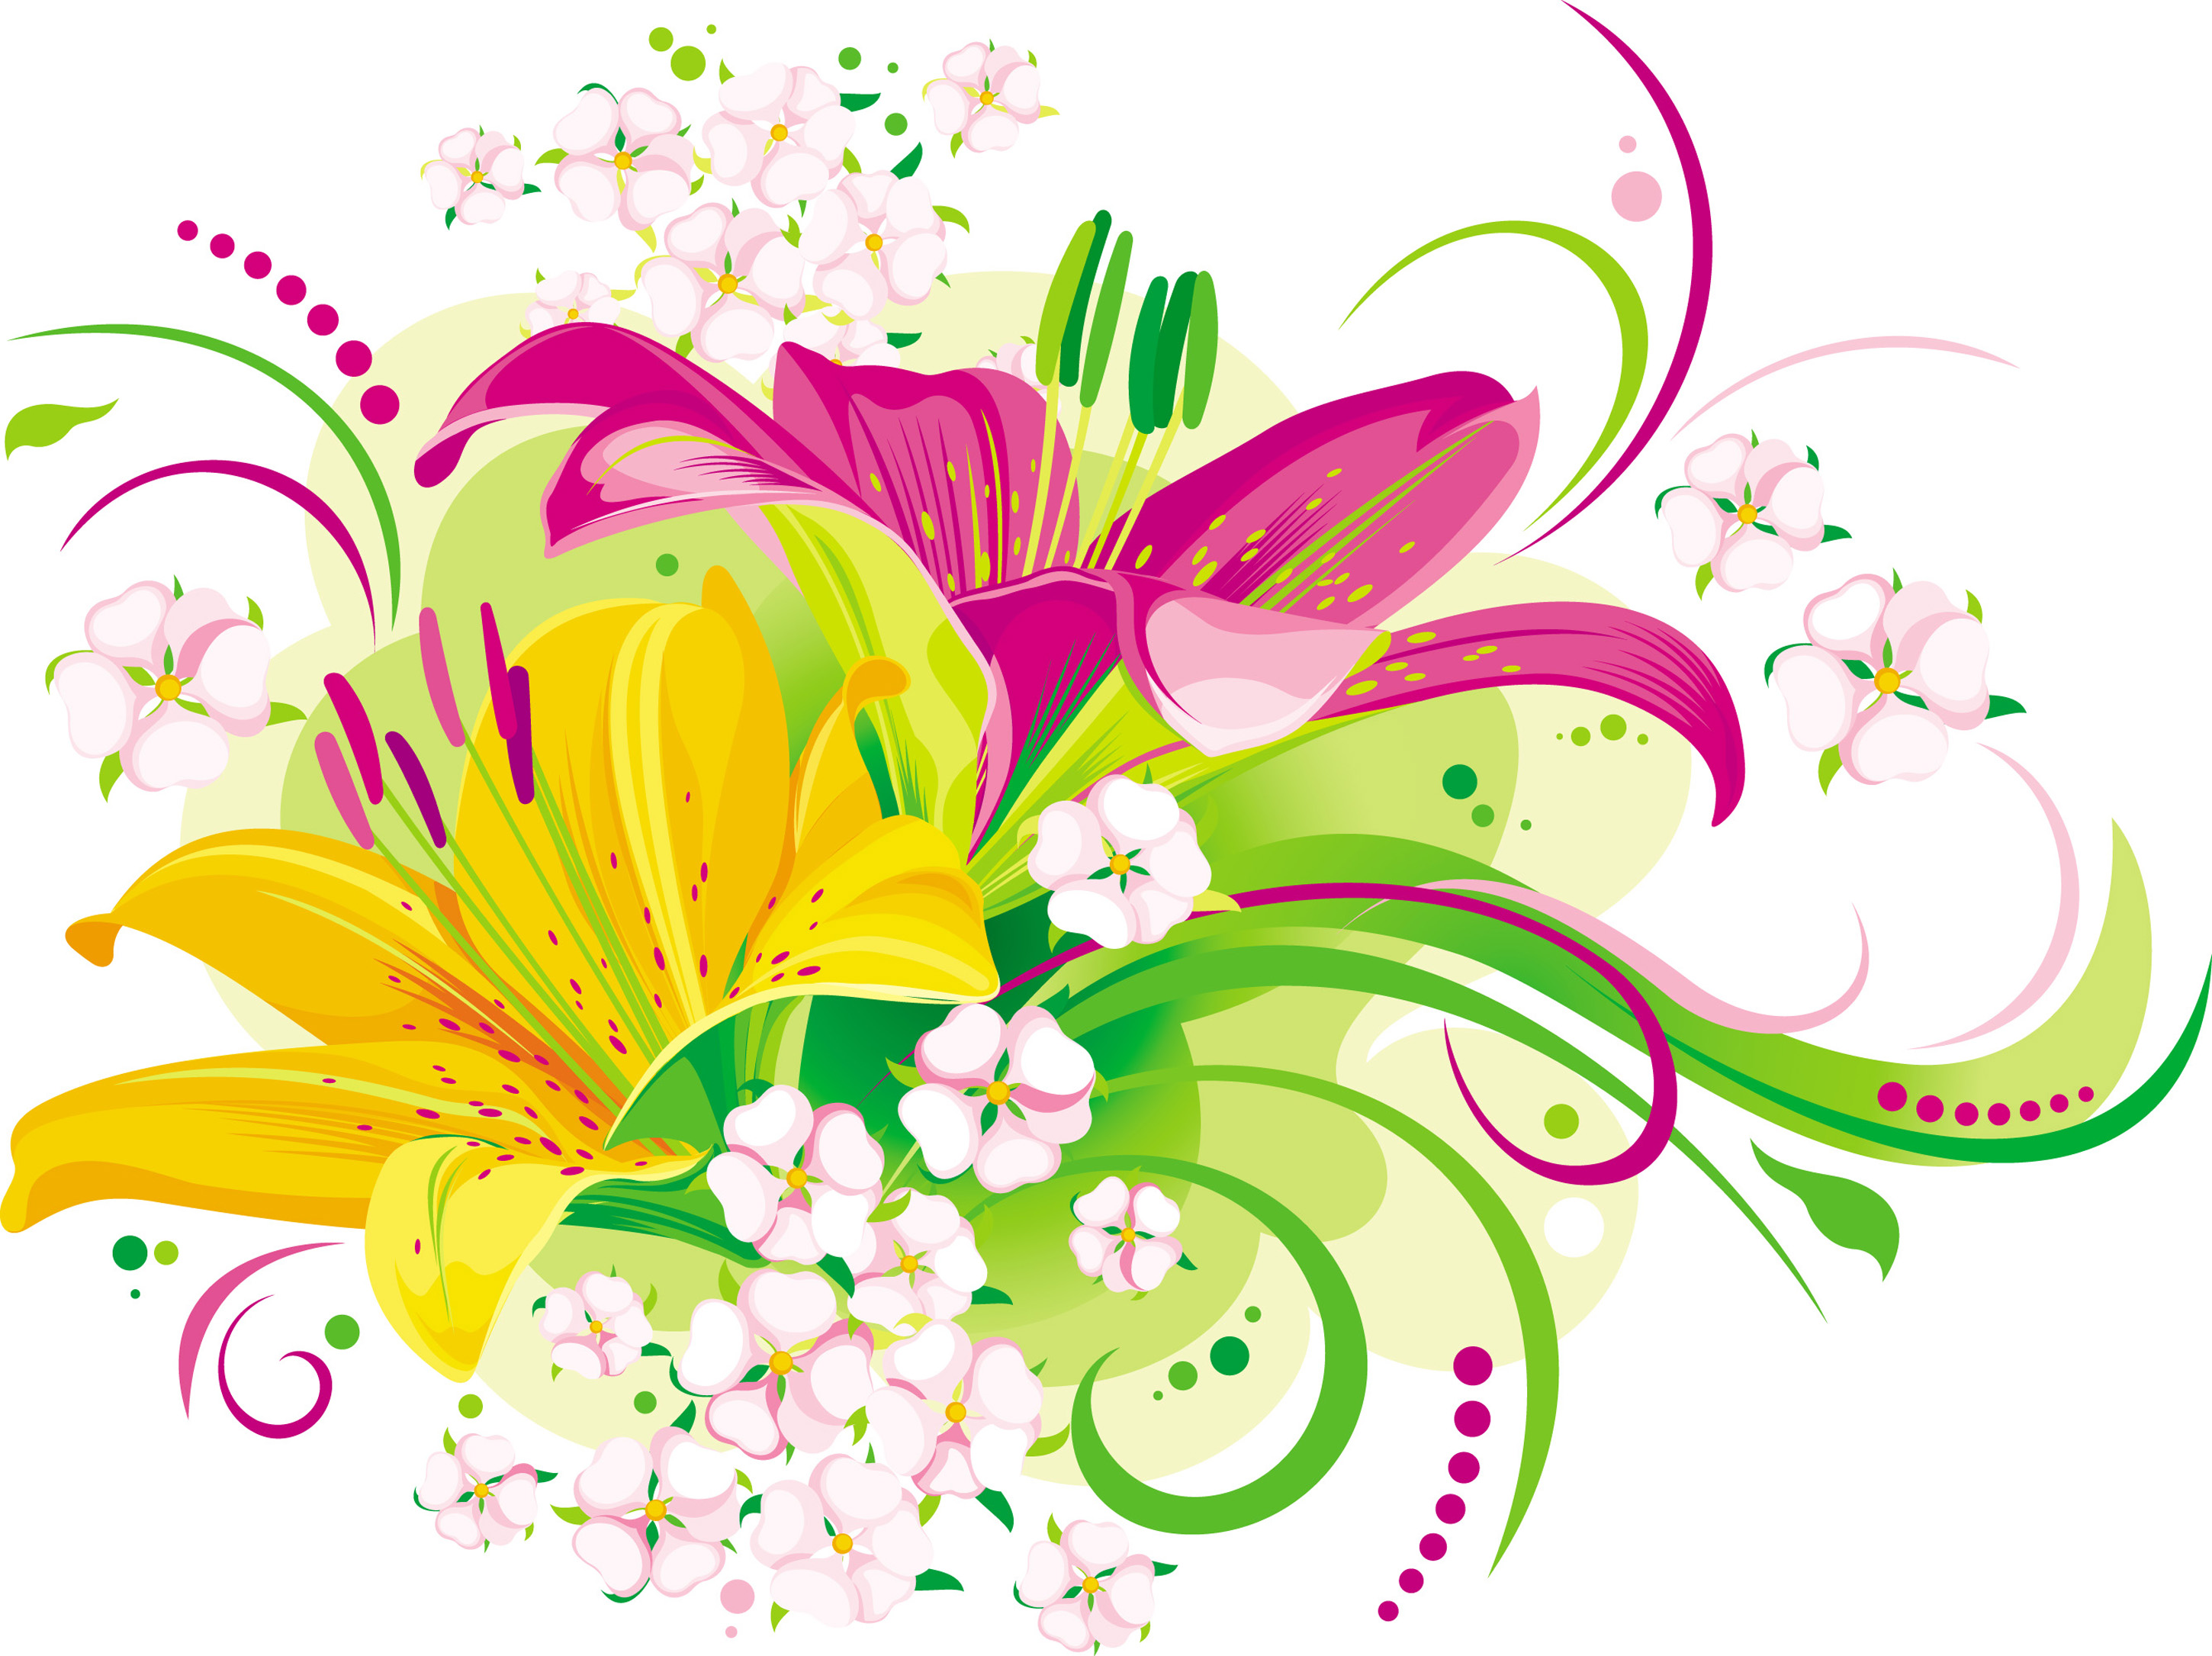 Free Vector Flower, Download Free Vector Flower png images, Free